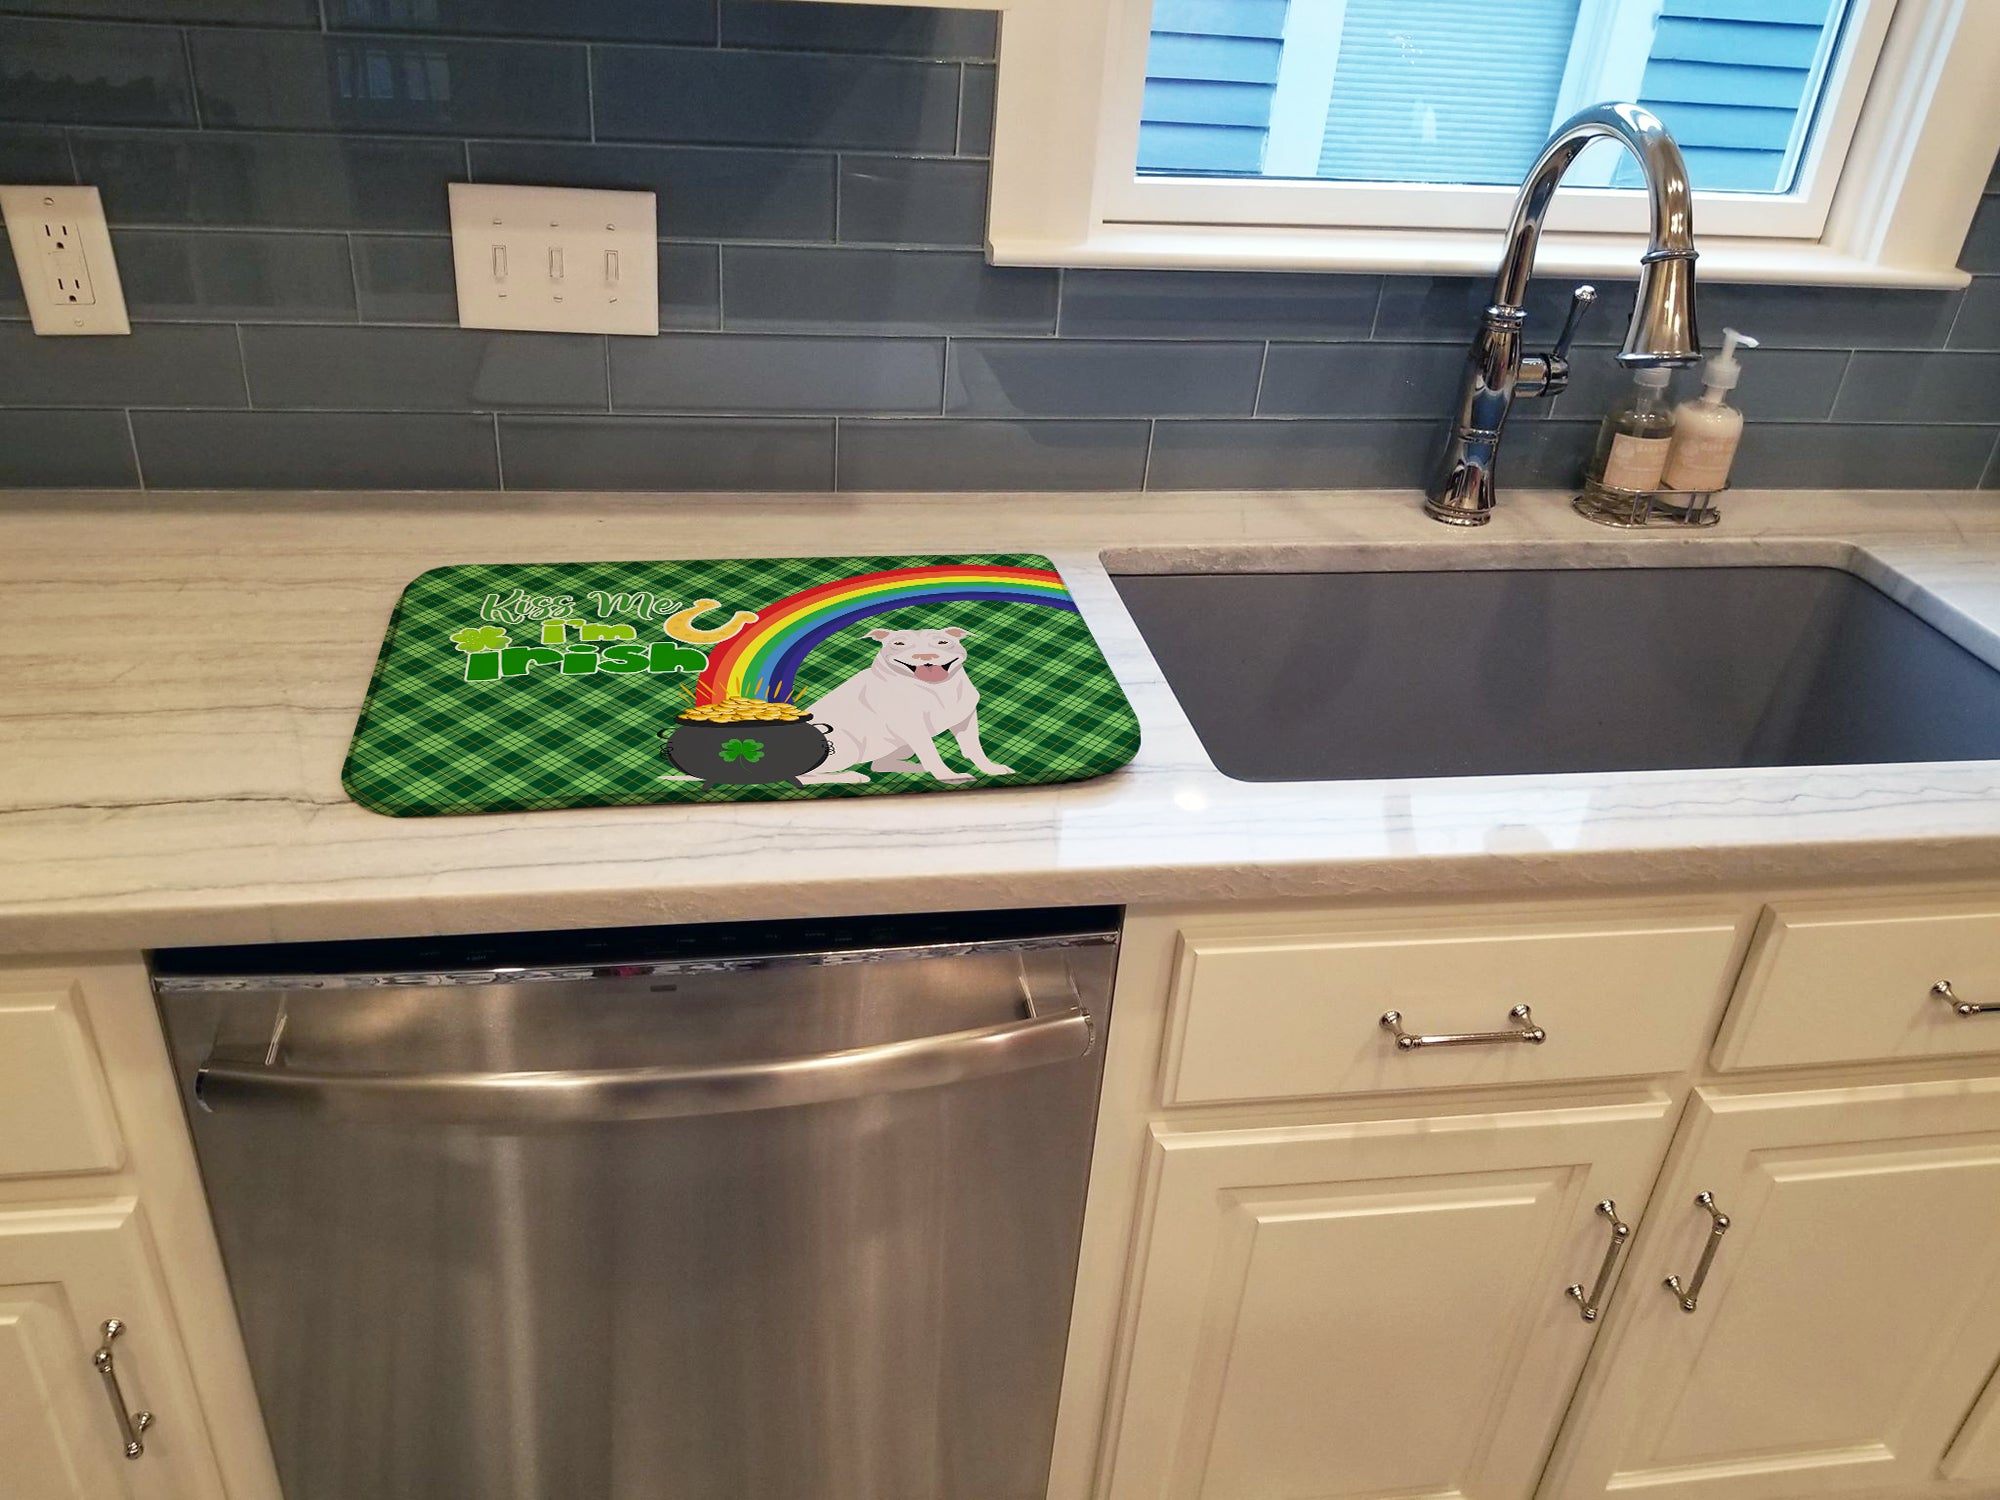 White Pit Bull Terrier St. Patrick's Day Dish Drying Mat  the-store.com.